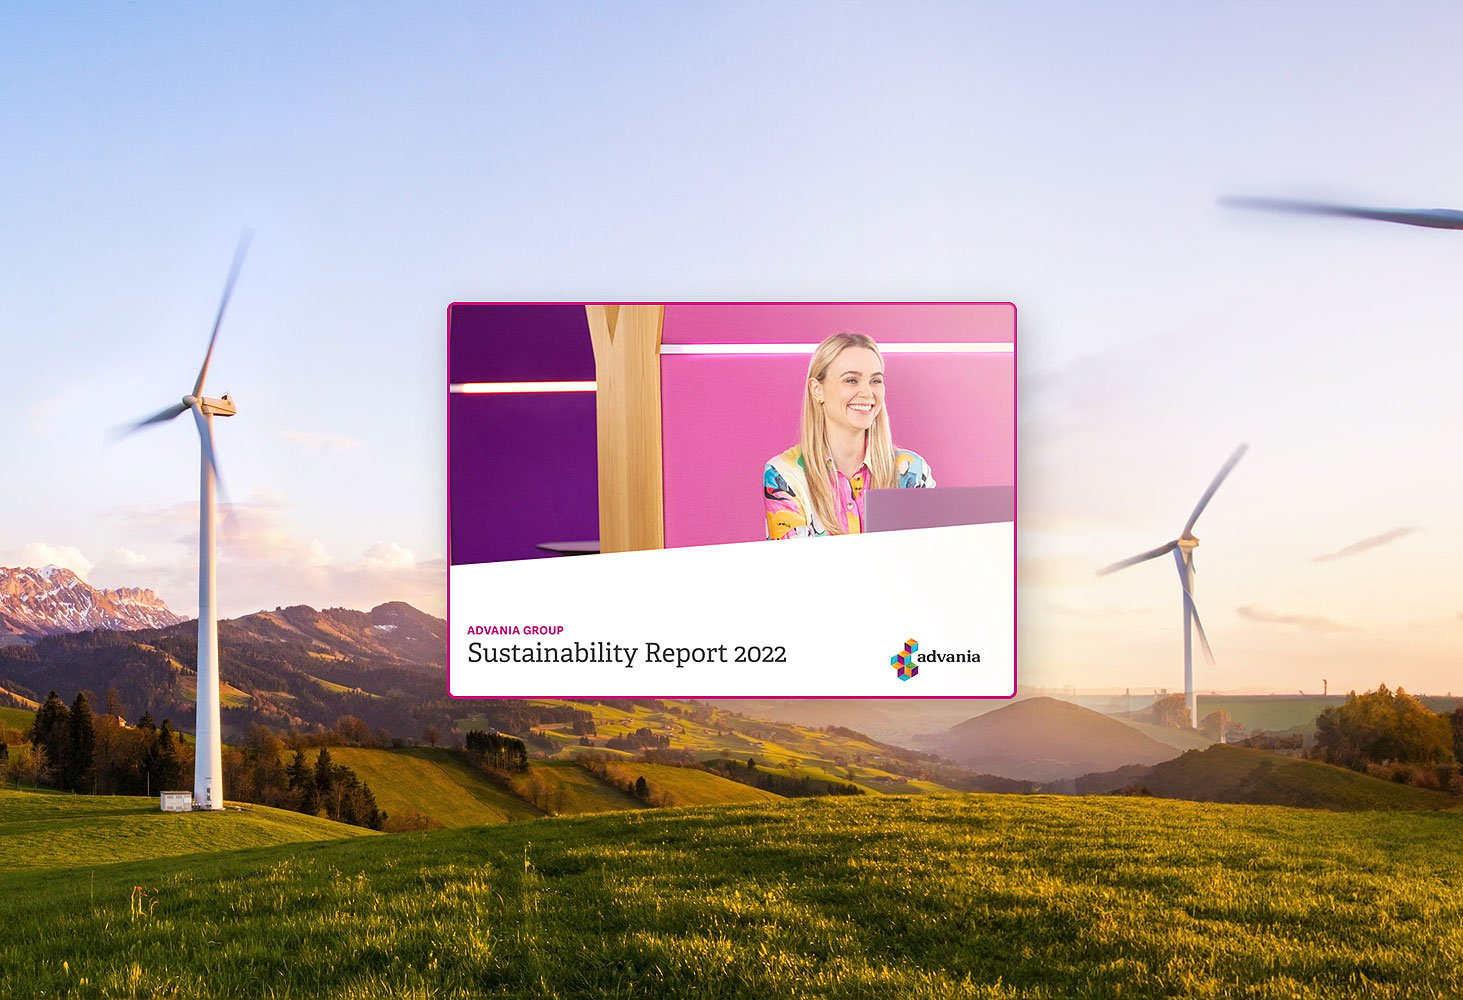 Advania Group's sustainability report 2022